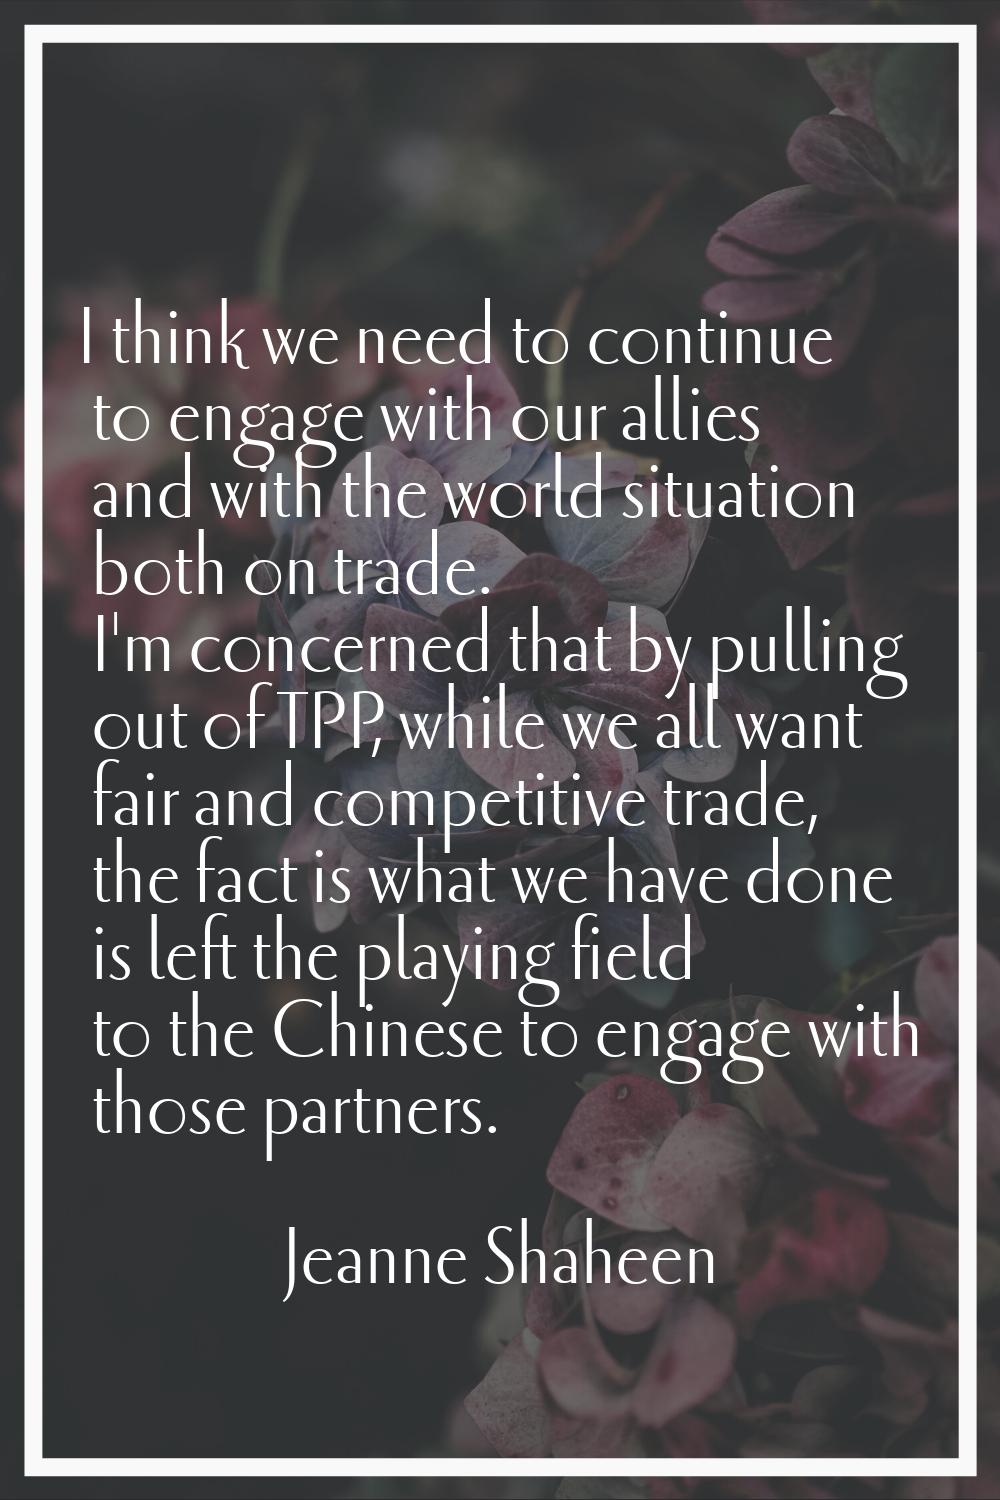 I think we need to continue to engage with our allies and with the world situation both on trade. I